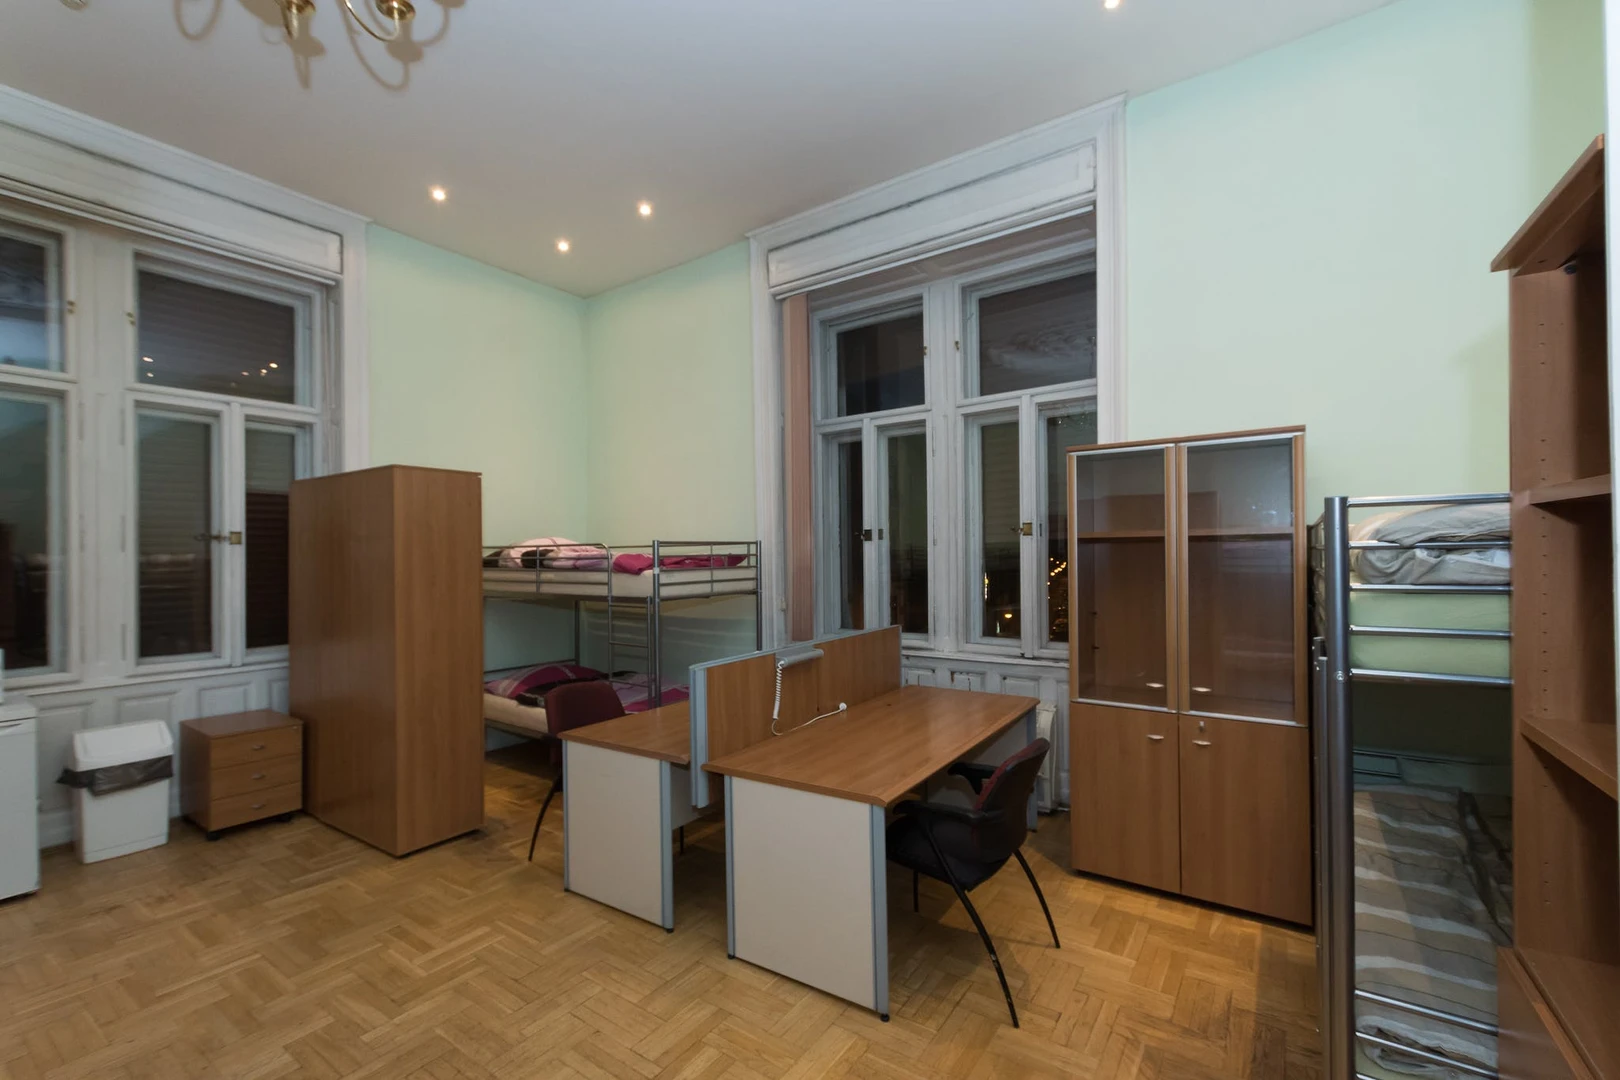 Cheap shared room in budapest